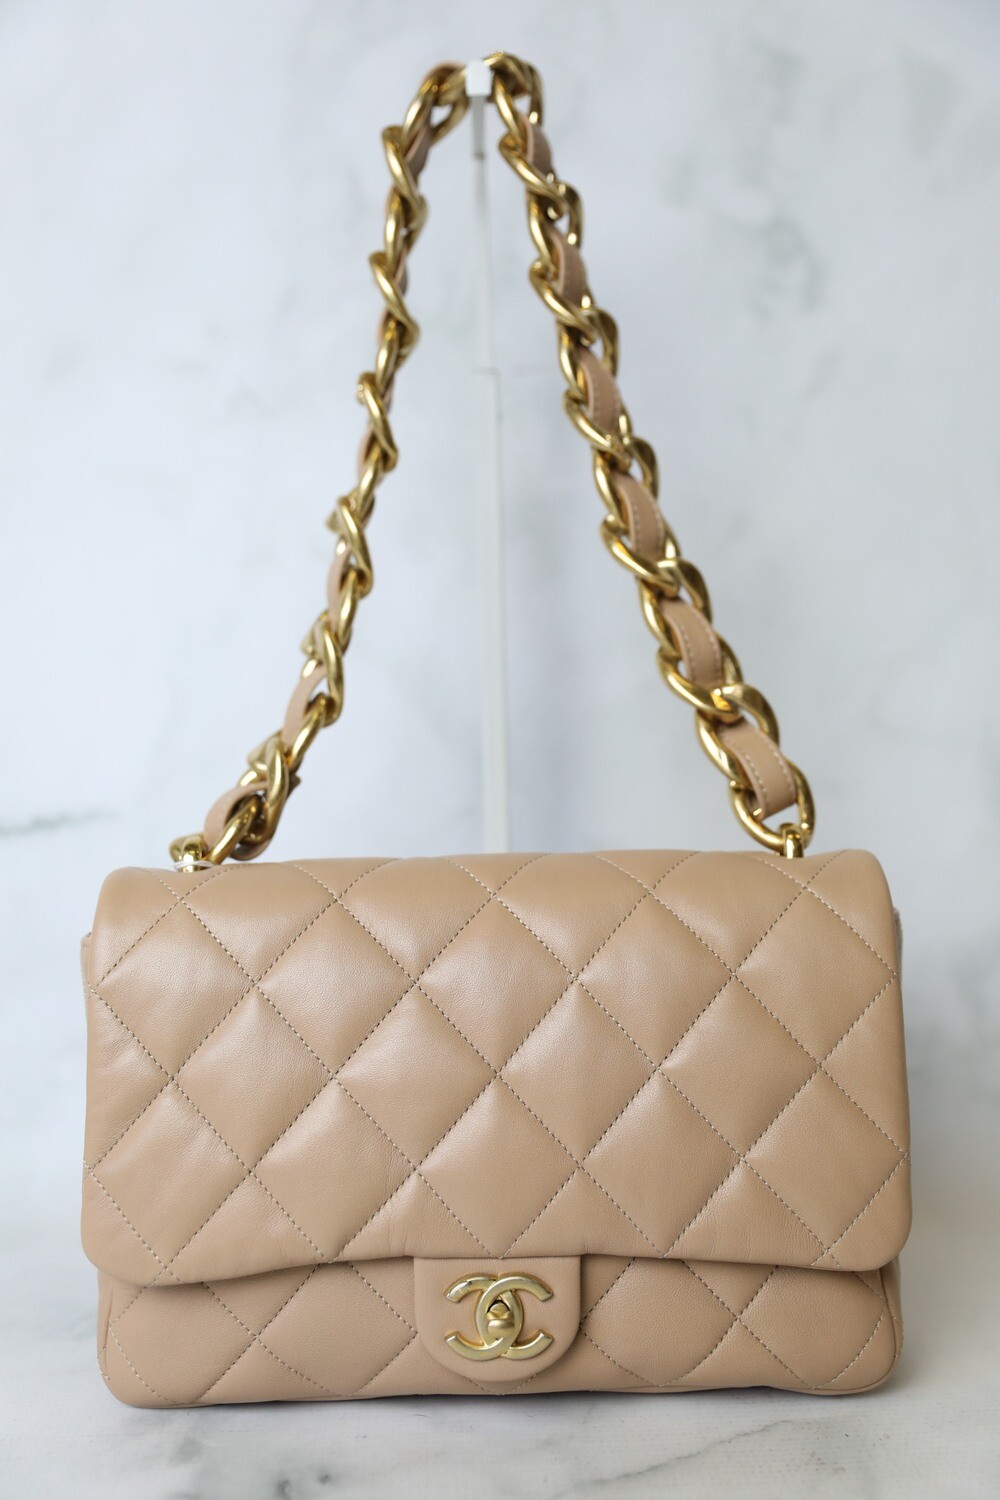 quilted chanel bag